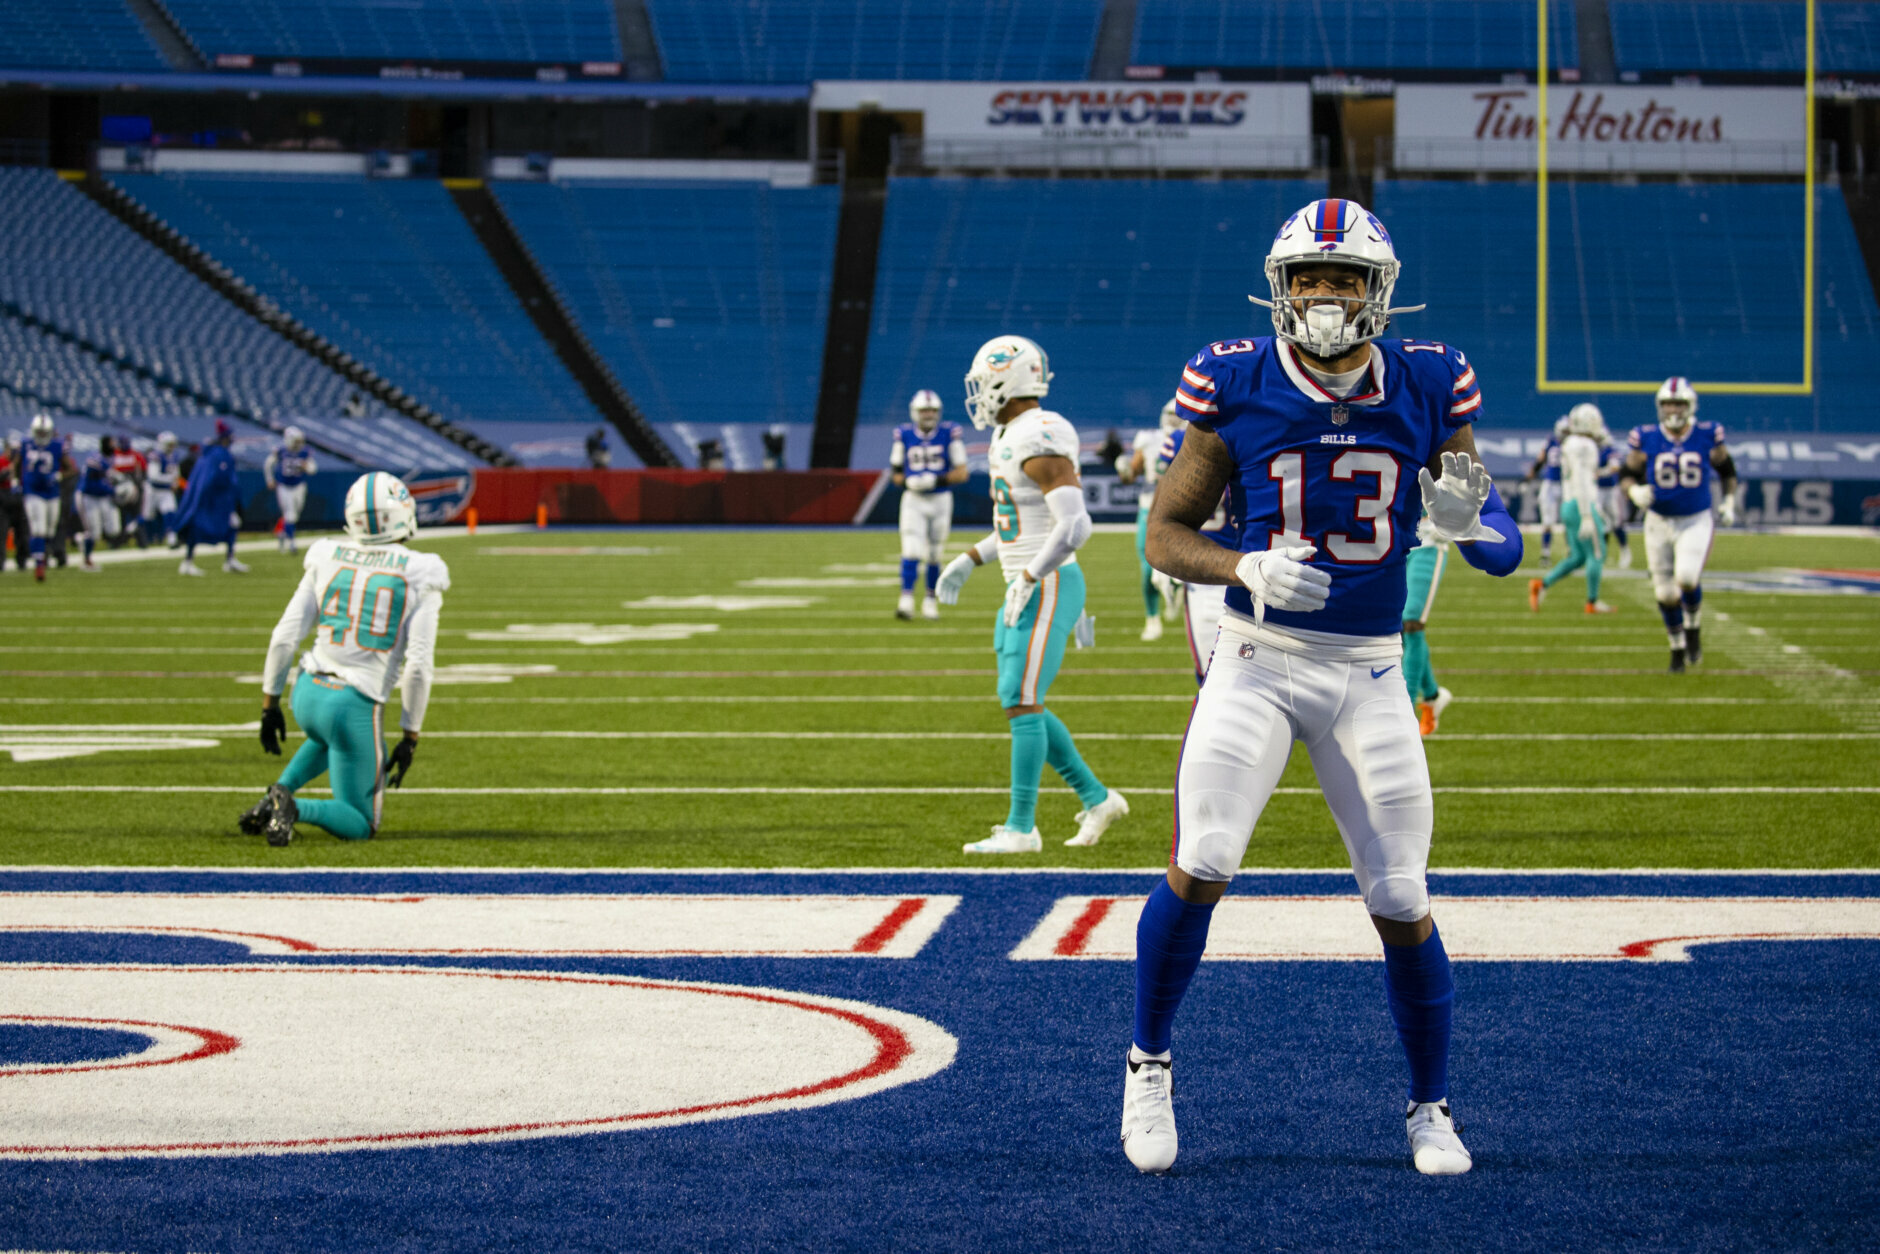 <p><b><i>Dolphins 26</i></b><br />
<b><i>Bills 56</i></b></p>
<p>Still don&#8217;t think Buffalo is for real? Against a division opponent playing for its season, the Bills had their second-highest scoring output in franchise history against the league&#8217;s top scoring defense. Their six straight double-digit wins to close out the regular season <a href="https://twitter.com/ESPNStatsInfo/status/1345859986484768769?s=20" target="_blank" rel="noopener">put them in some elite company</a>. This feels like a team of destiny.</p>
<p>Even though Miami <a href="https://twitter.com/ESPNStatsInfo/status/1345848891657375745?s=20" target="_blank" rel="noopener">made the wrong kind of history in this loss</a>, the Dolphins have no reason to hang their heads. Going 10-6 in the second year of a massive rebuild is a big leap forward, and they&#8217;ll have the third and 18th overall picks in the draft to further bolster an already-solid roster. It looks like this Fins-Bills rivalry will define the AFC East for years to come — a refreshing change after New England&#8217;s decades of domination.</p>
